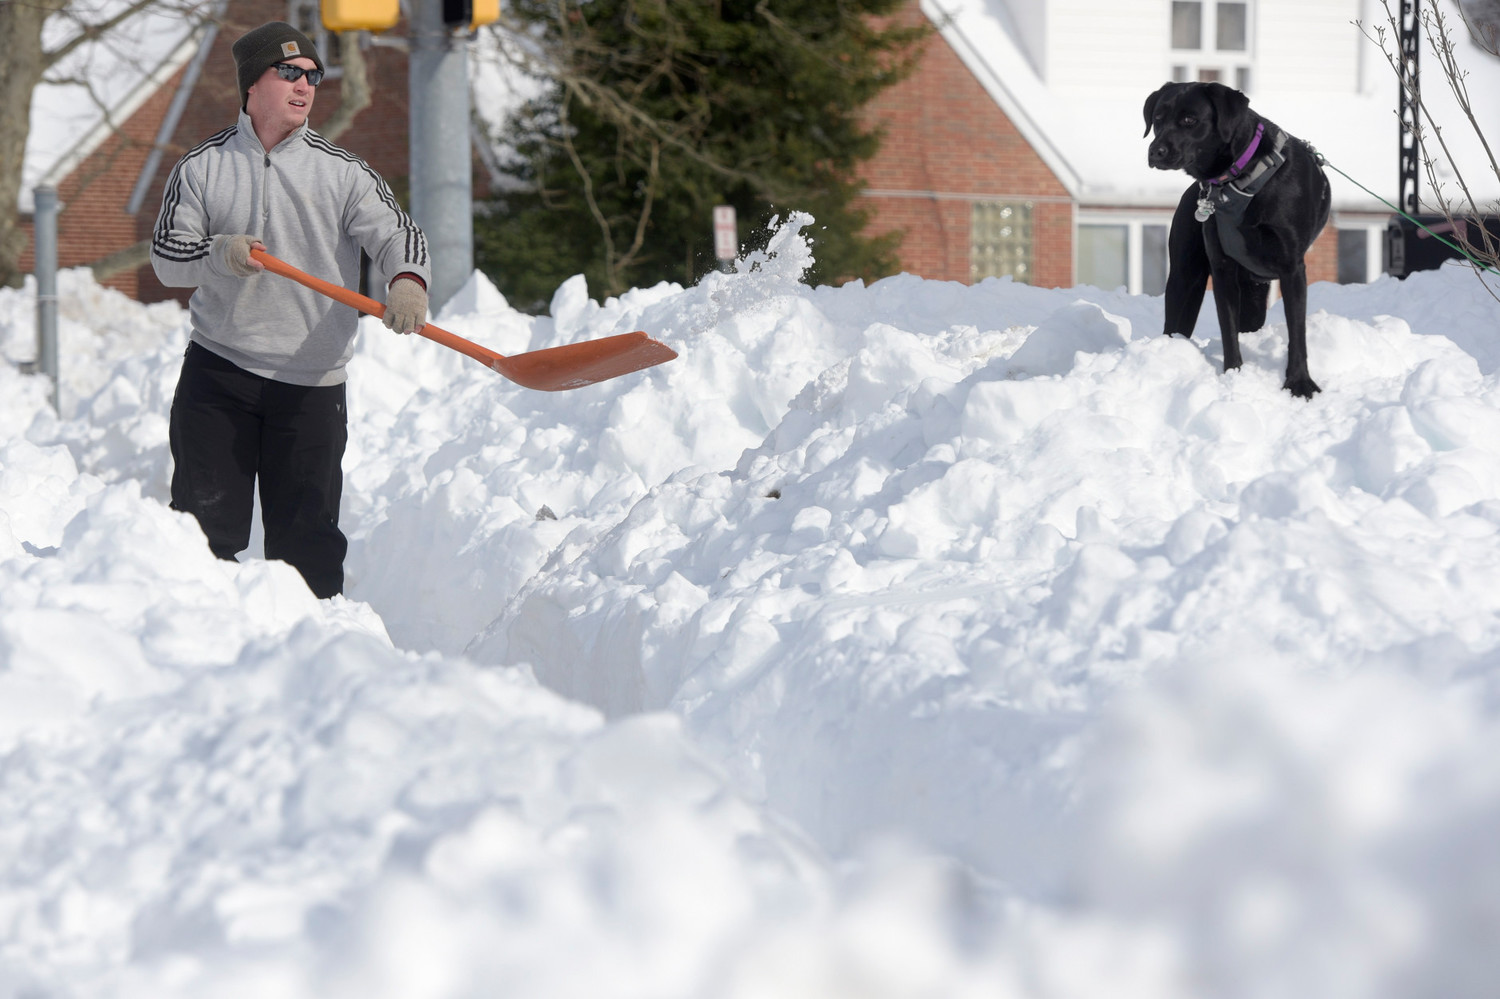 Get ready to shovel - but do it safely! Bend knees so you don't hurt your back and NEVER overdo lifting heavy snow!